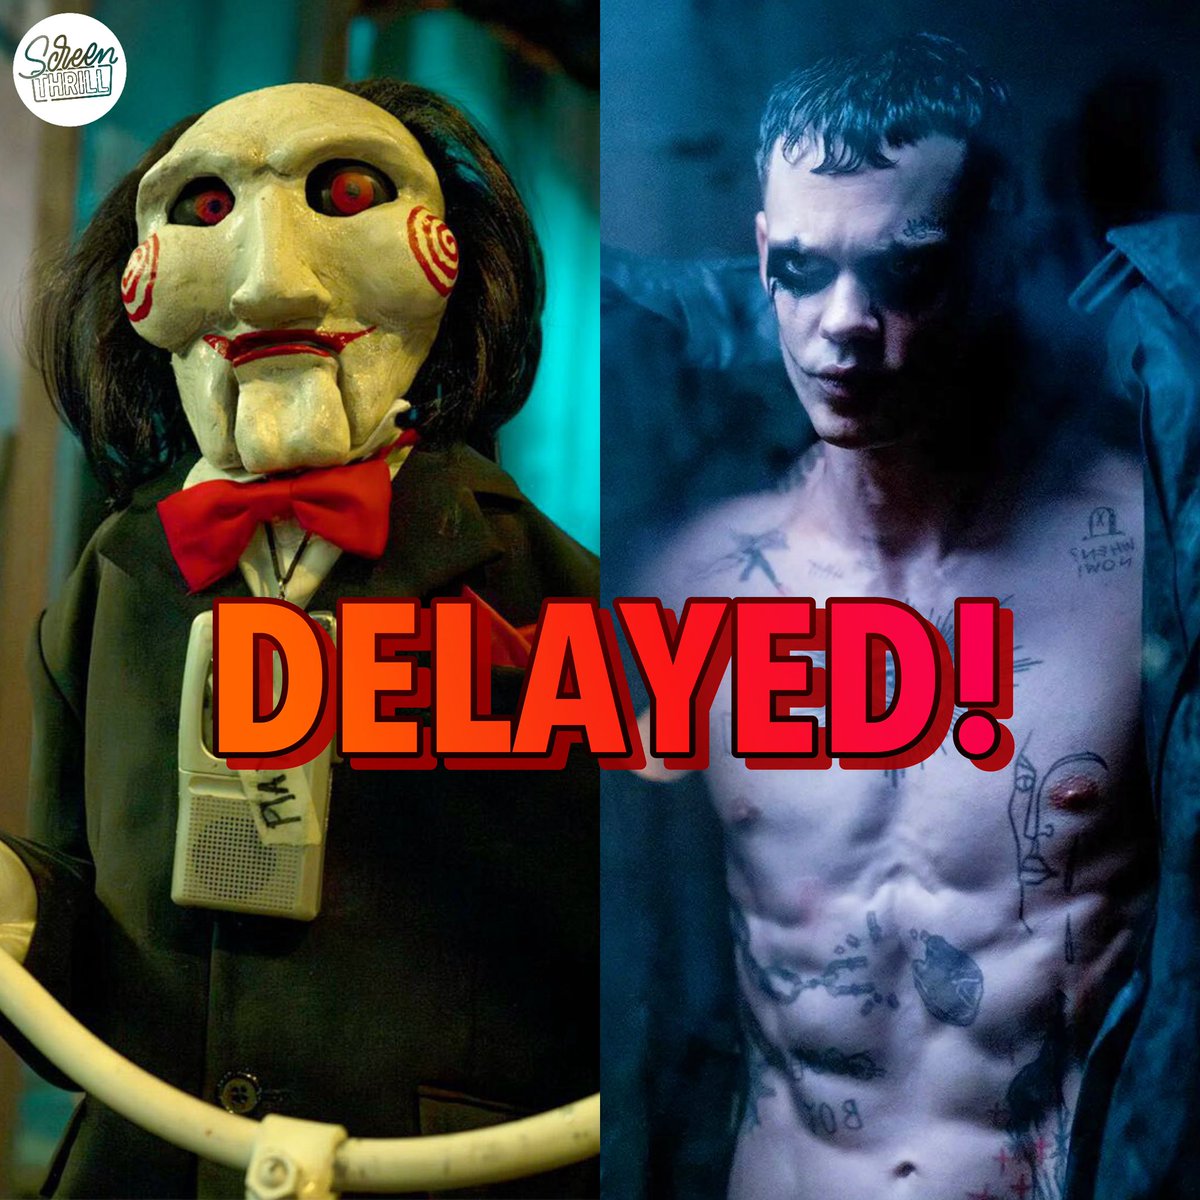 ‘THE CROW’ remake has been delayed from June 7 2024 to August 23 2024 and ‘SAW 11’ has been delayed by one year from September 27, 2024 to September 26, 2025.